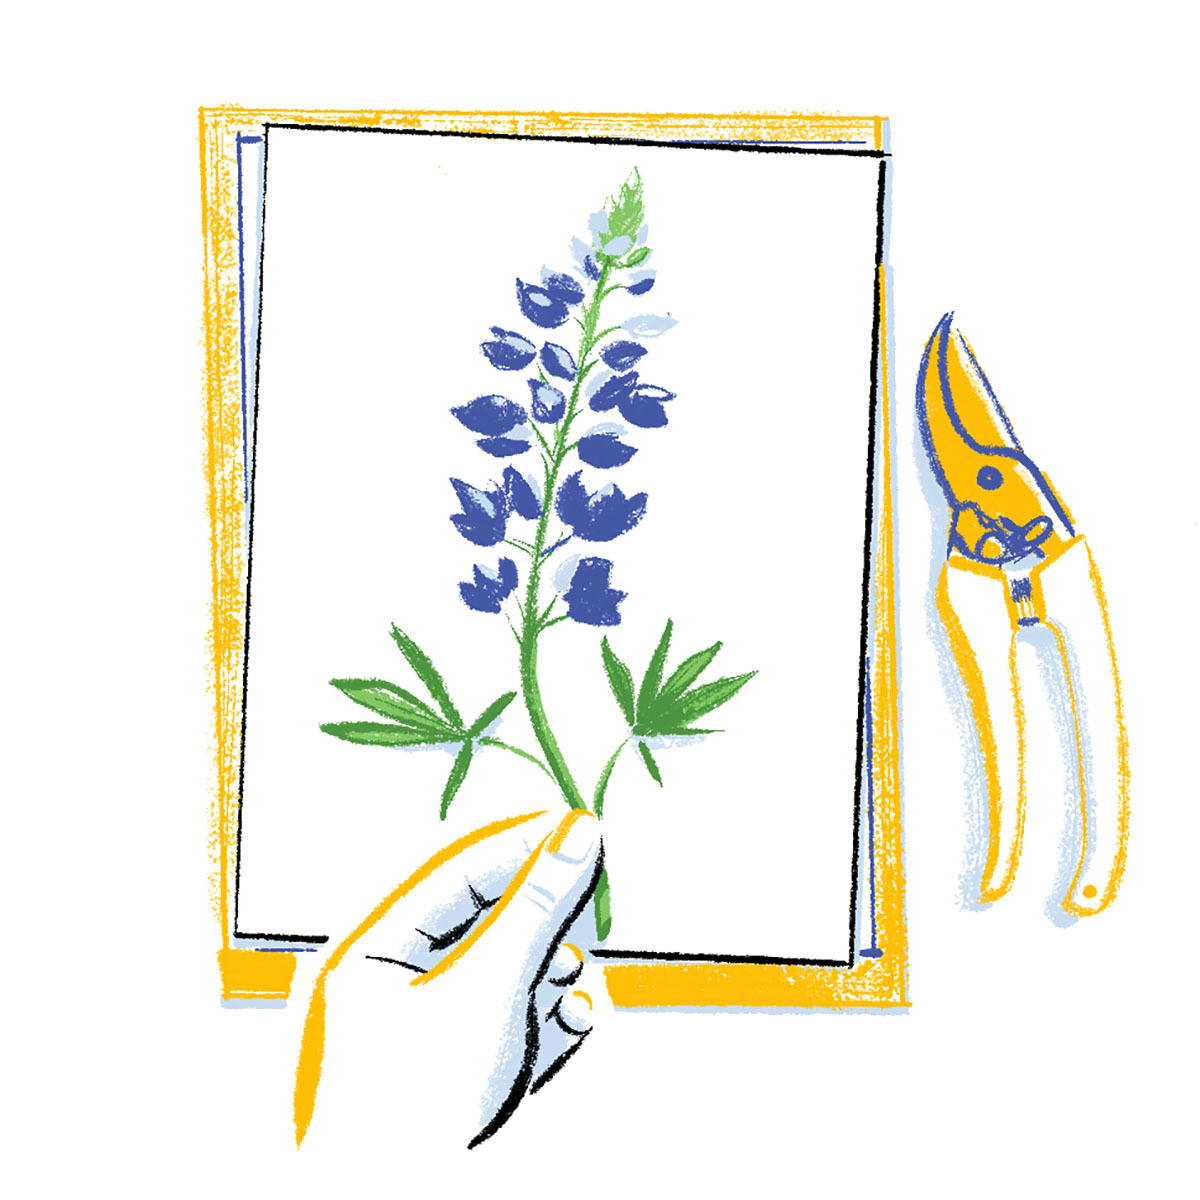 An illustration of a person laying a bluebonnet on a piece of paper